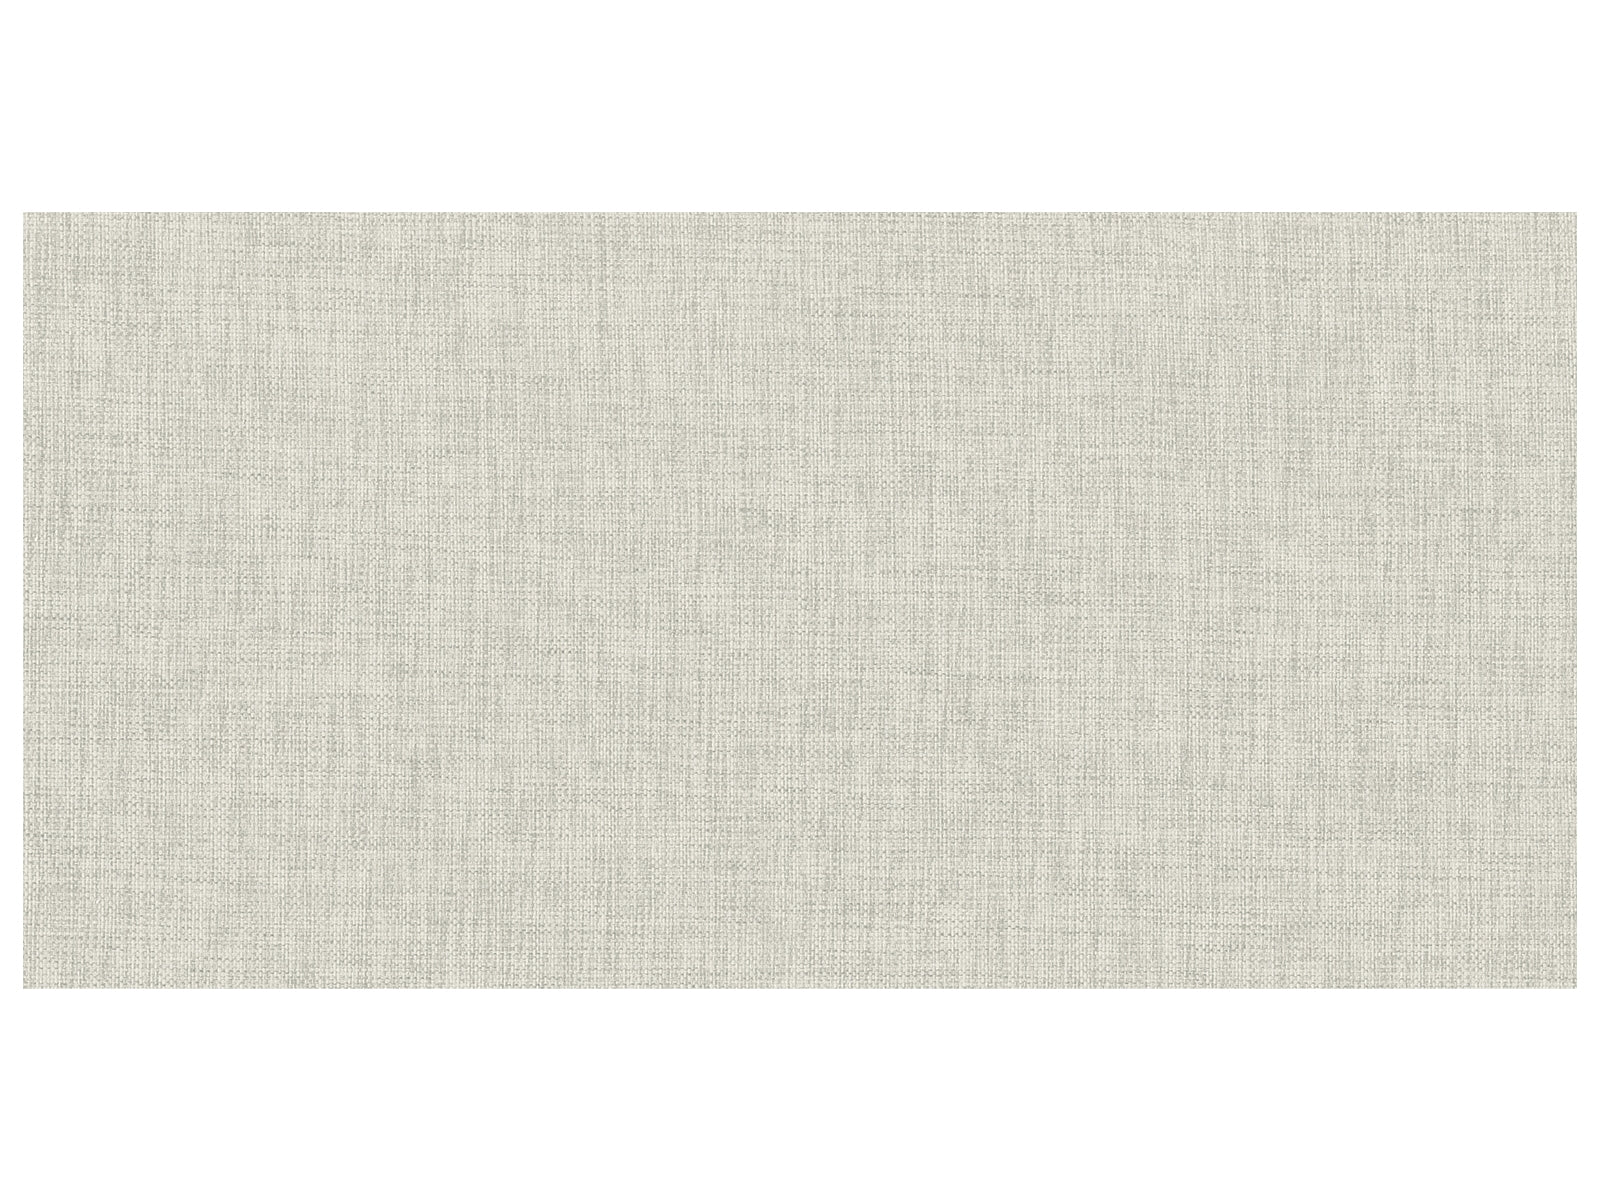 12 X 24 In Crossweave Parchment Matte Rectified Color Body Porcelain